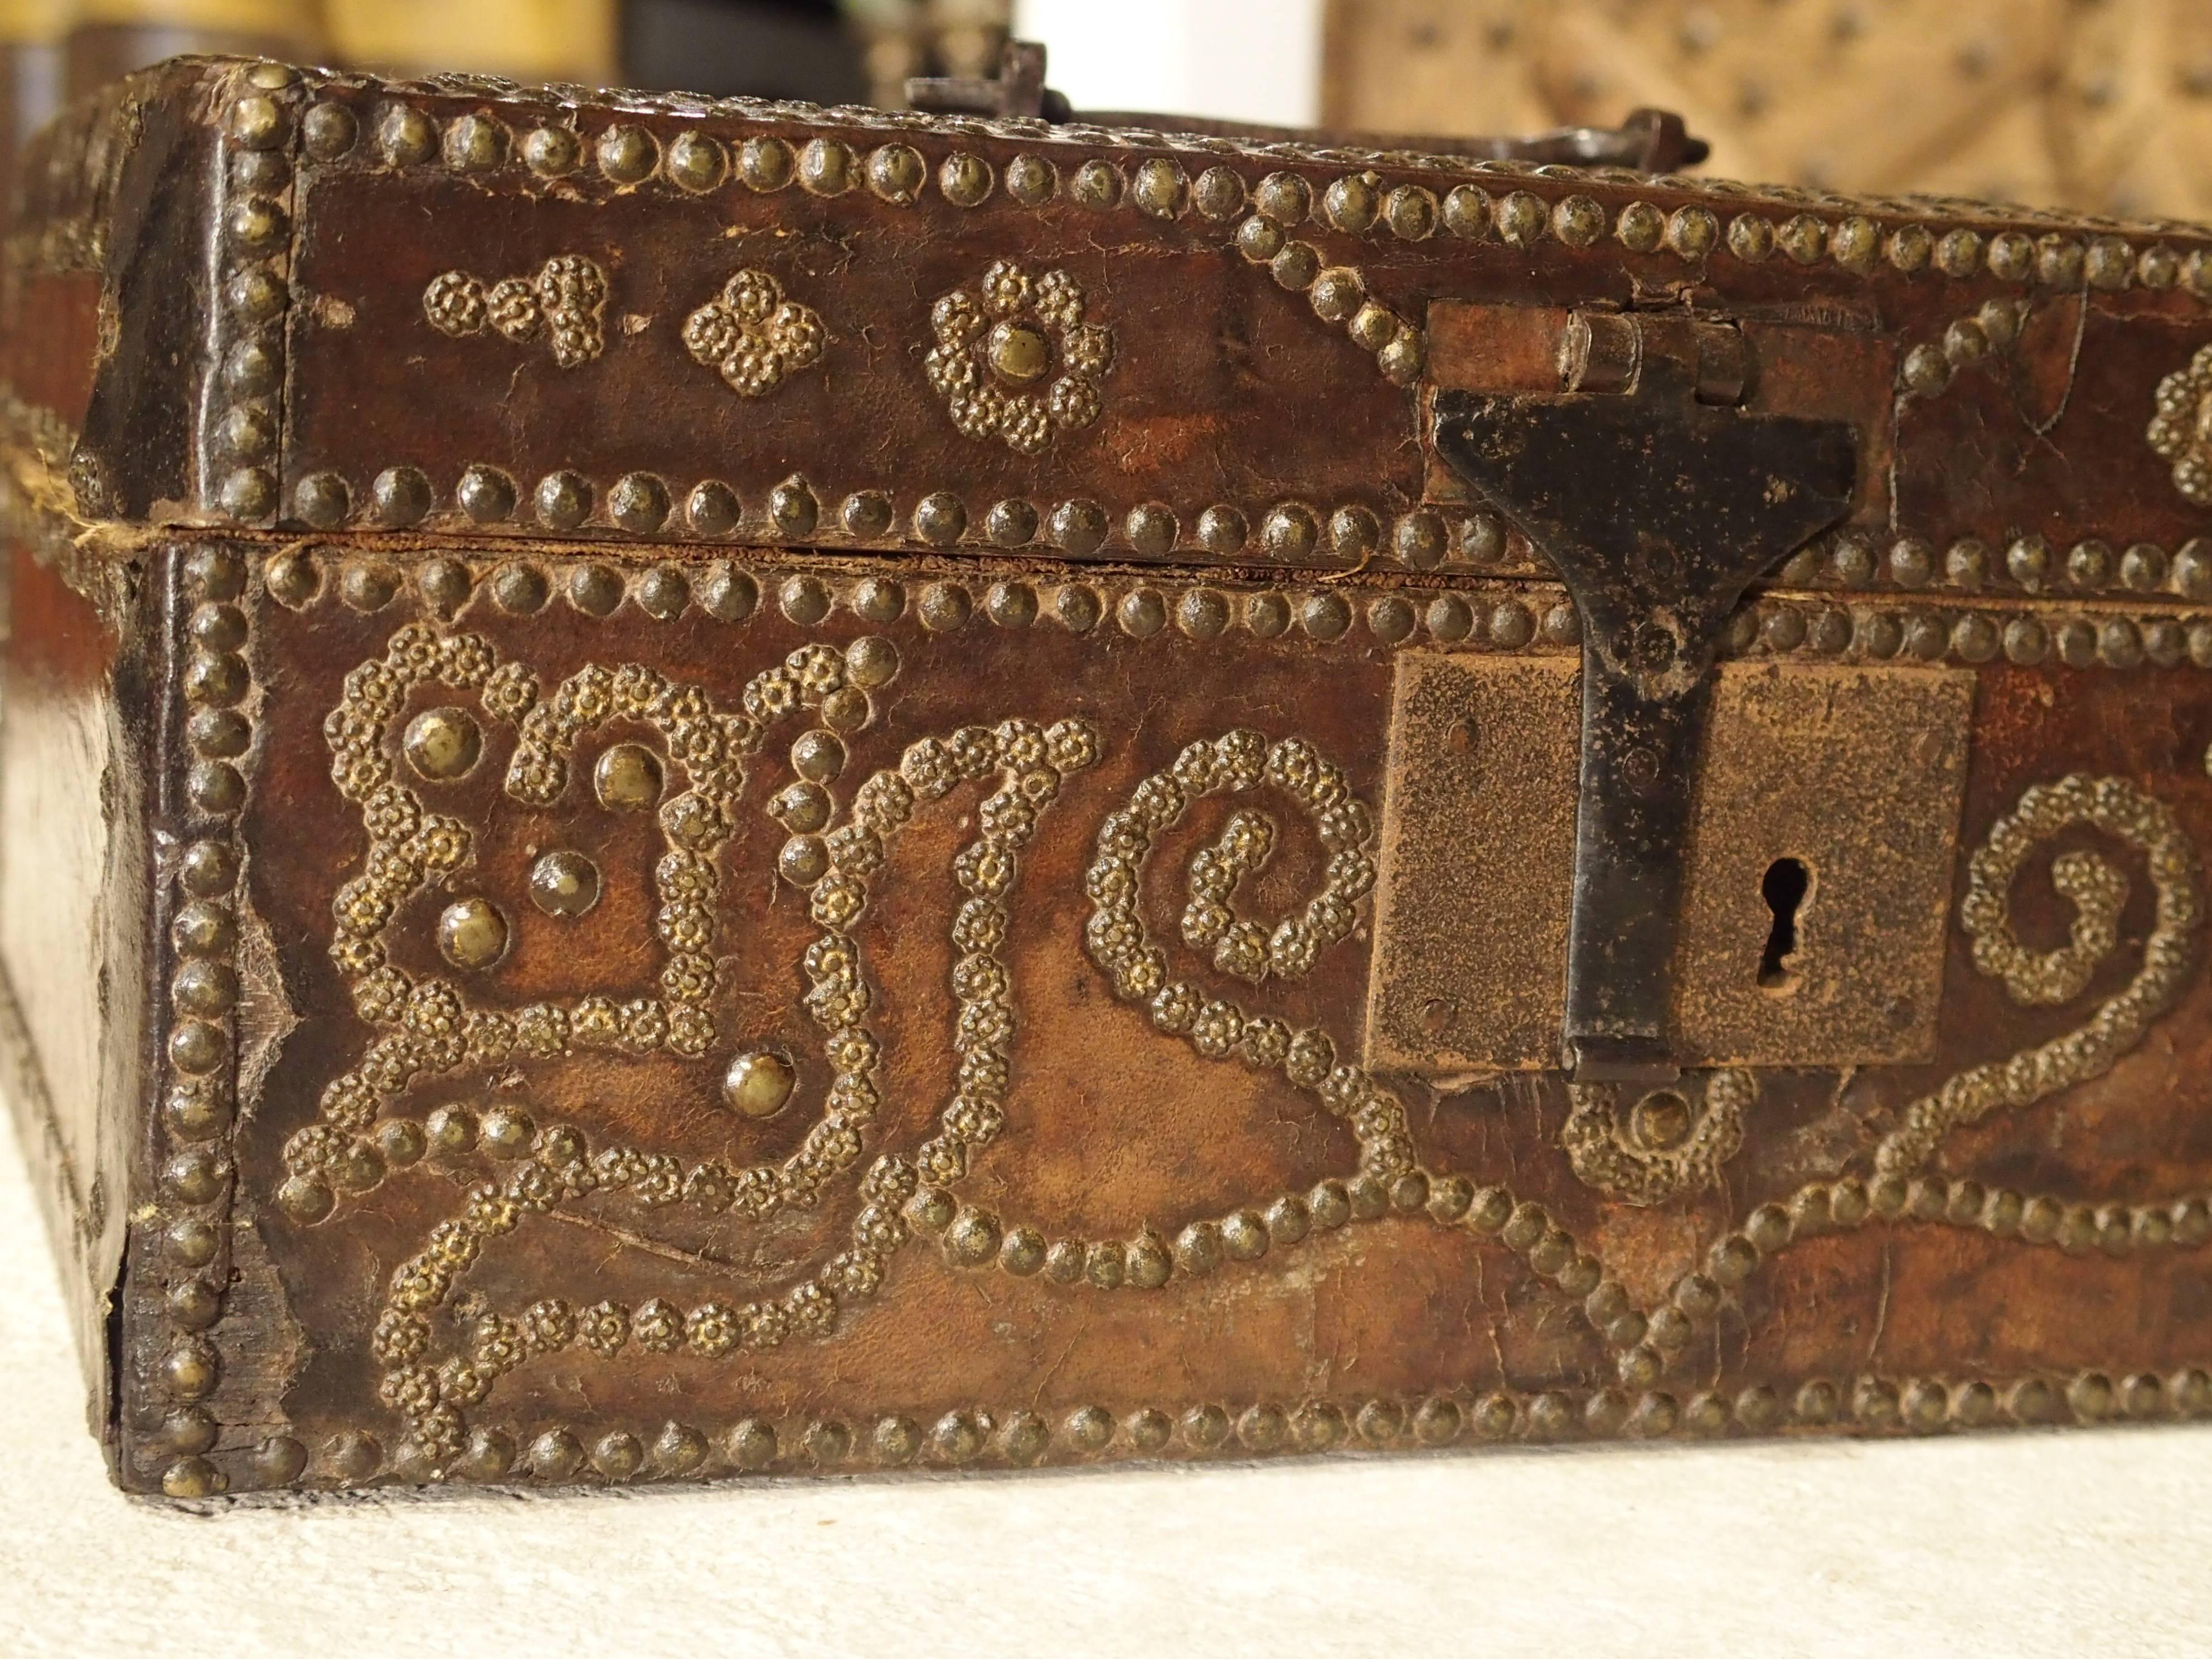 This small 17th century brass studded leather box is from France. There are two types of brass studs used on it, decorative and round. Both are mostly seen on the front making up intricate patterns of floral and foliate designs. The leather is very